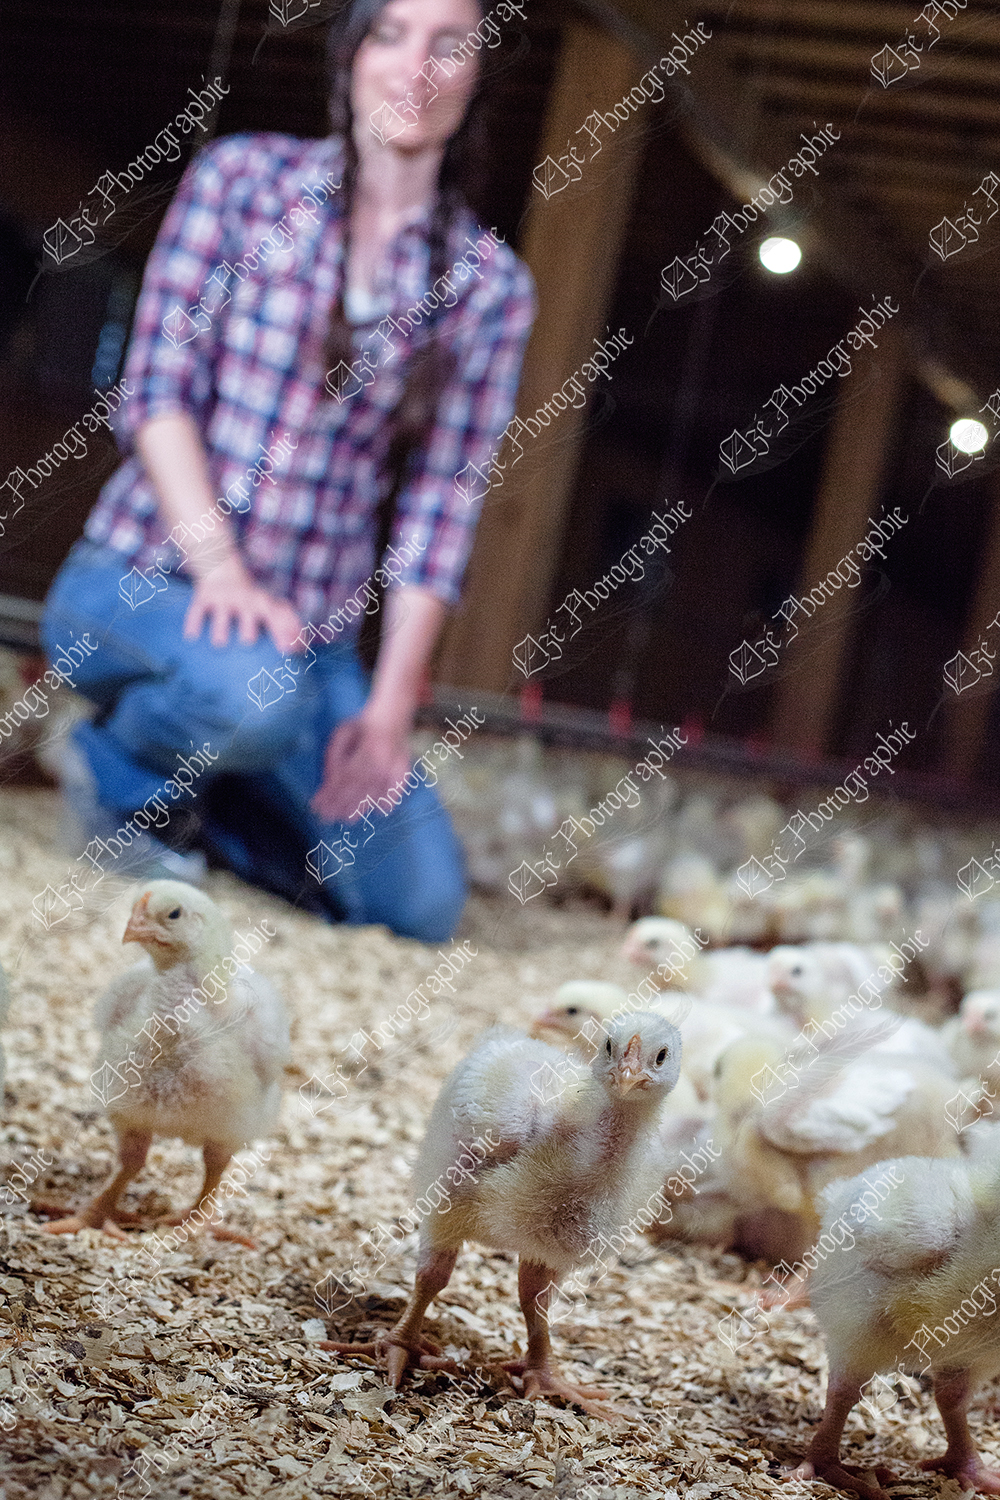 elze_photo_9059_poulet_elevage_litiere_largest_holdings_with_broilers